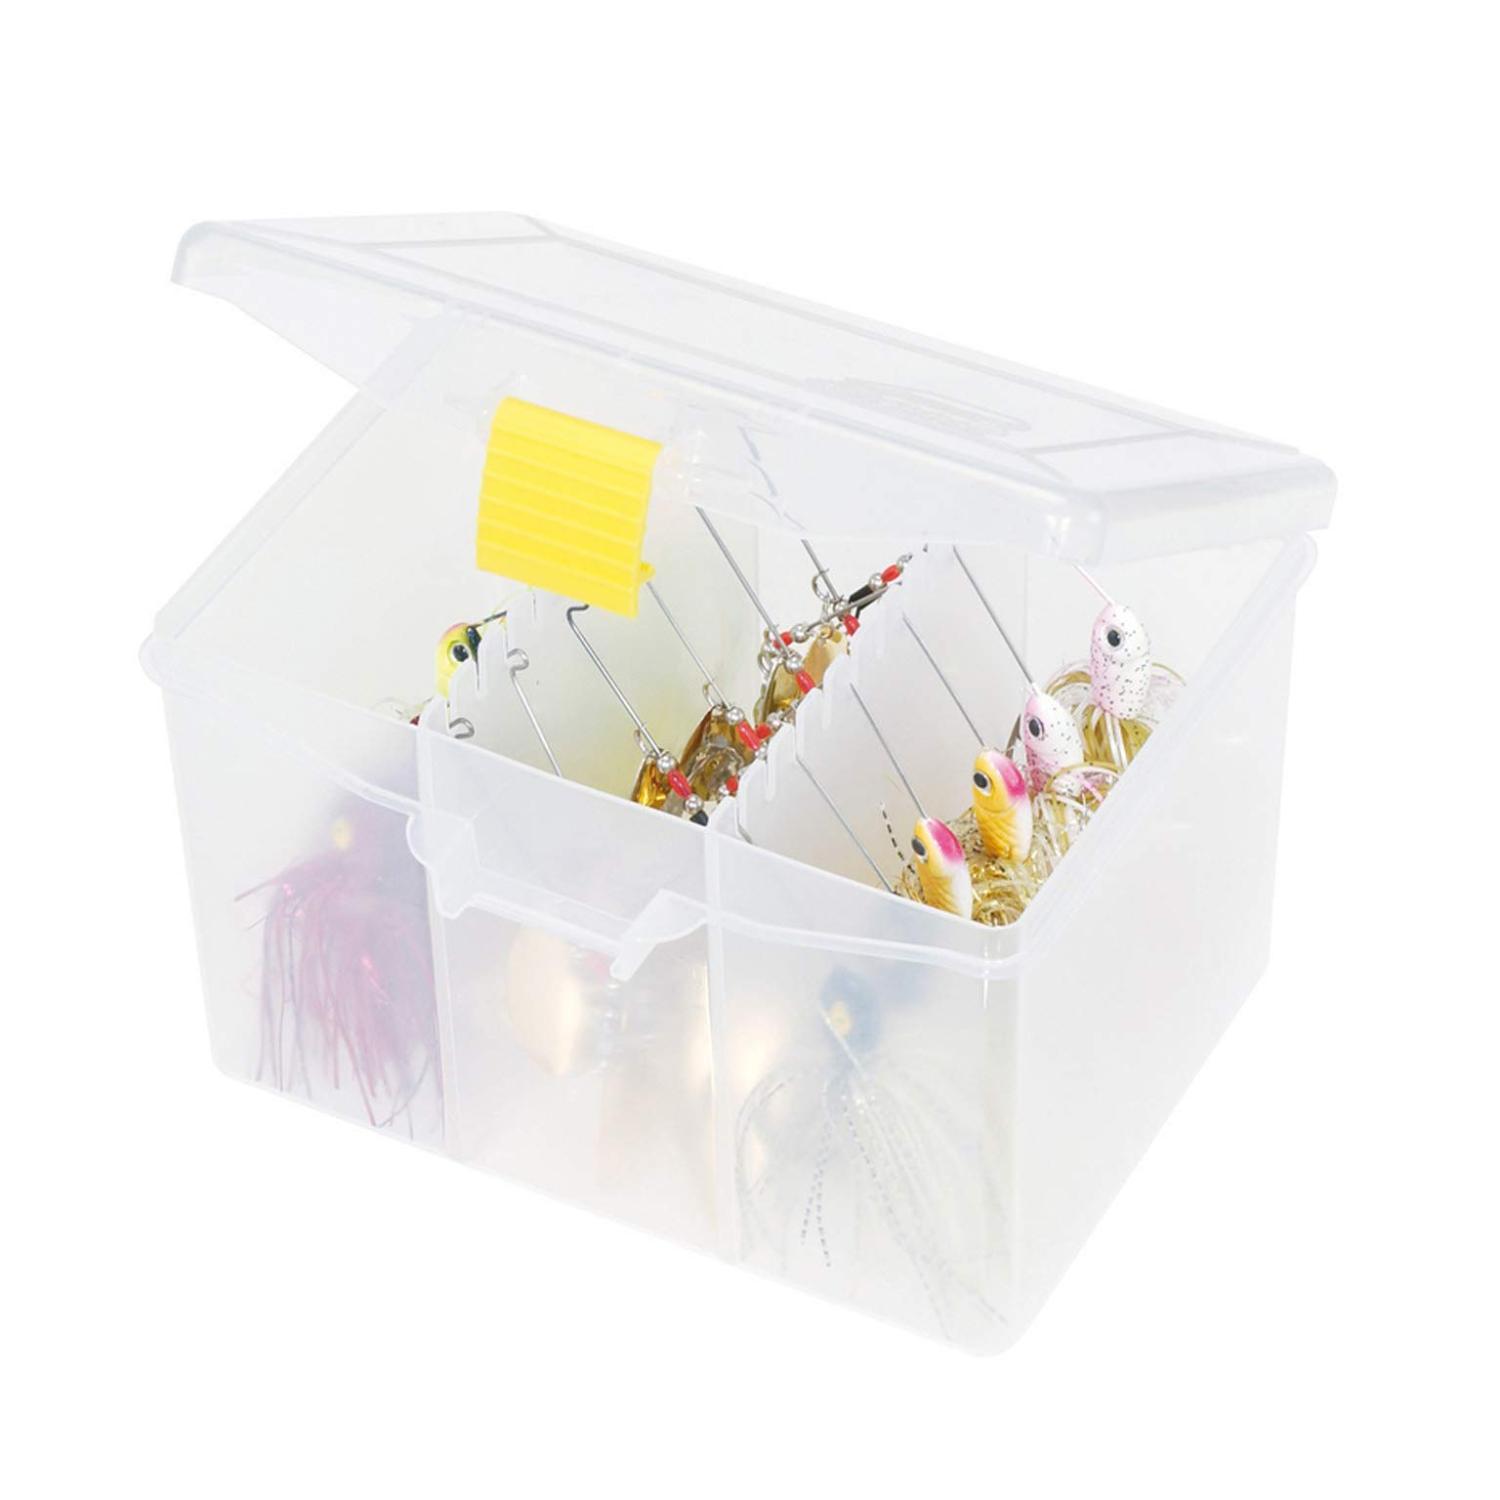 Plano Spinner Bait StowAway Multi-compartment Box Premium Tackle Storage  for Fishing 3 Compartments